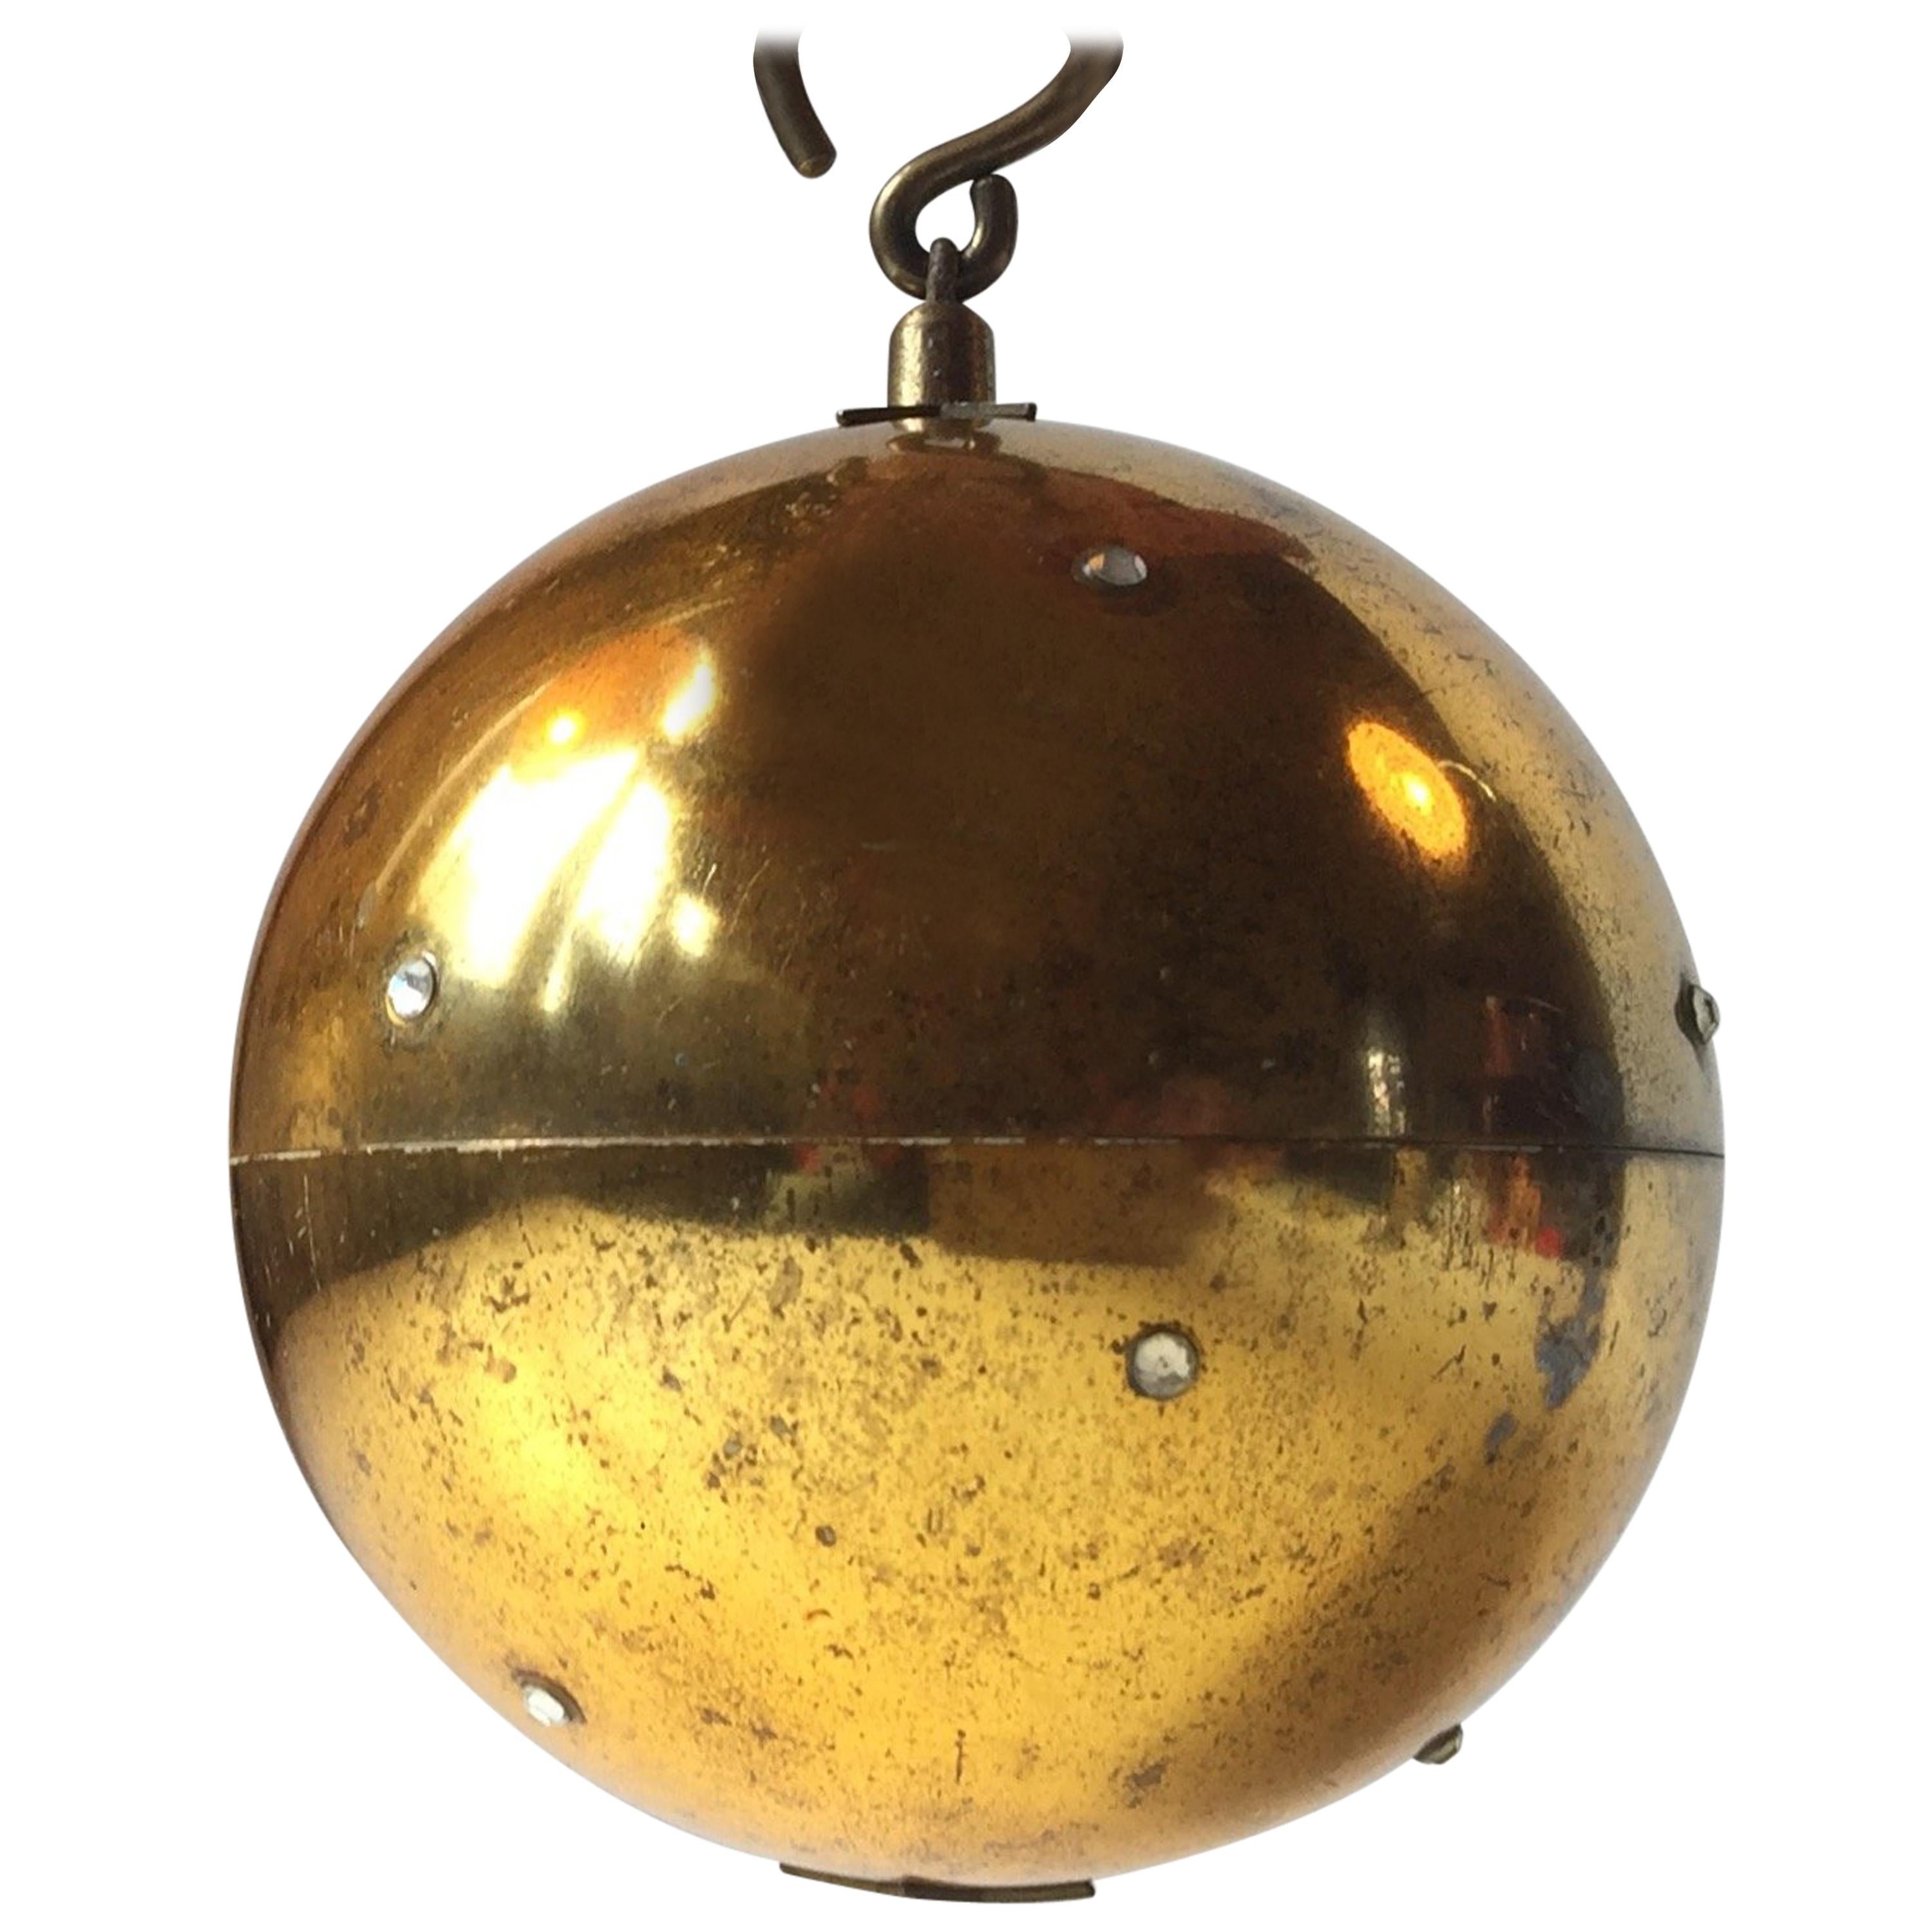 Vintage Mechanical Pull-up Christmas Ball by Reuge, Switzerland, 1960s